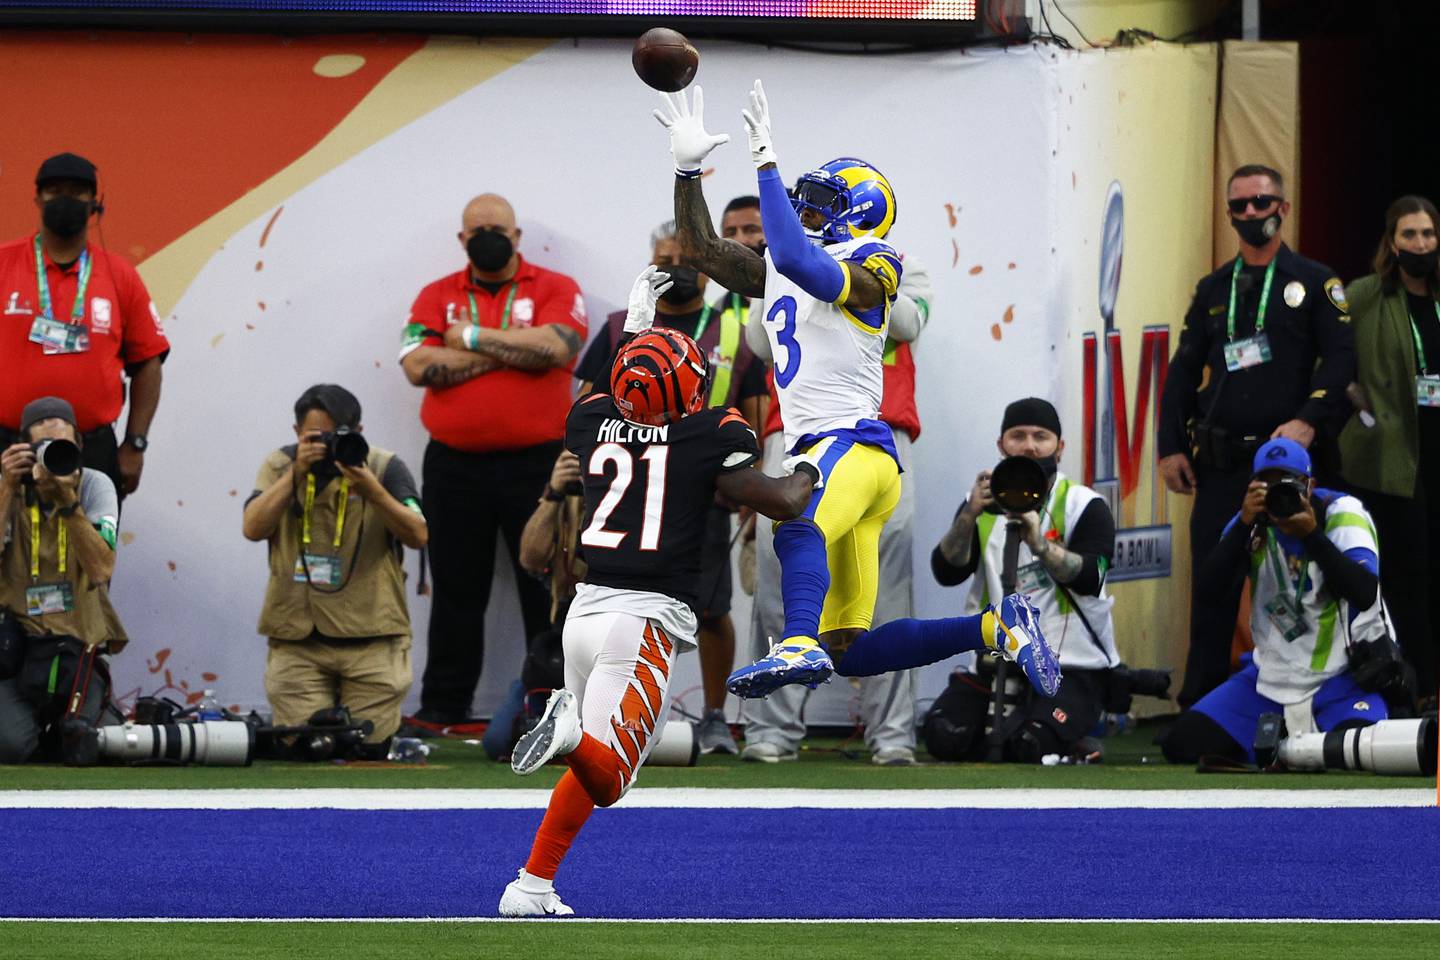 INGLEWOOD, CALIFORNIA - FEBRUARY 13: Odell Beckham Jr. #3 of the Los Angeles Rams makes a catch over Mike Hilton #21 of the Cincinnati Bengals for a touchdown in the first quarter during Super Bowl LVI at SoFi Stadium on February 13, 2022 in Inglewood, California.